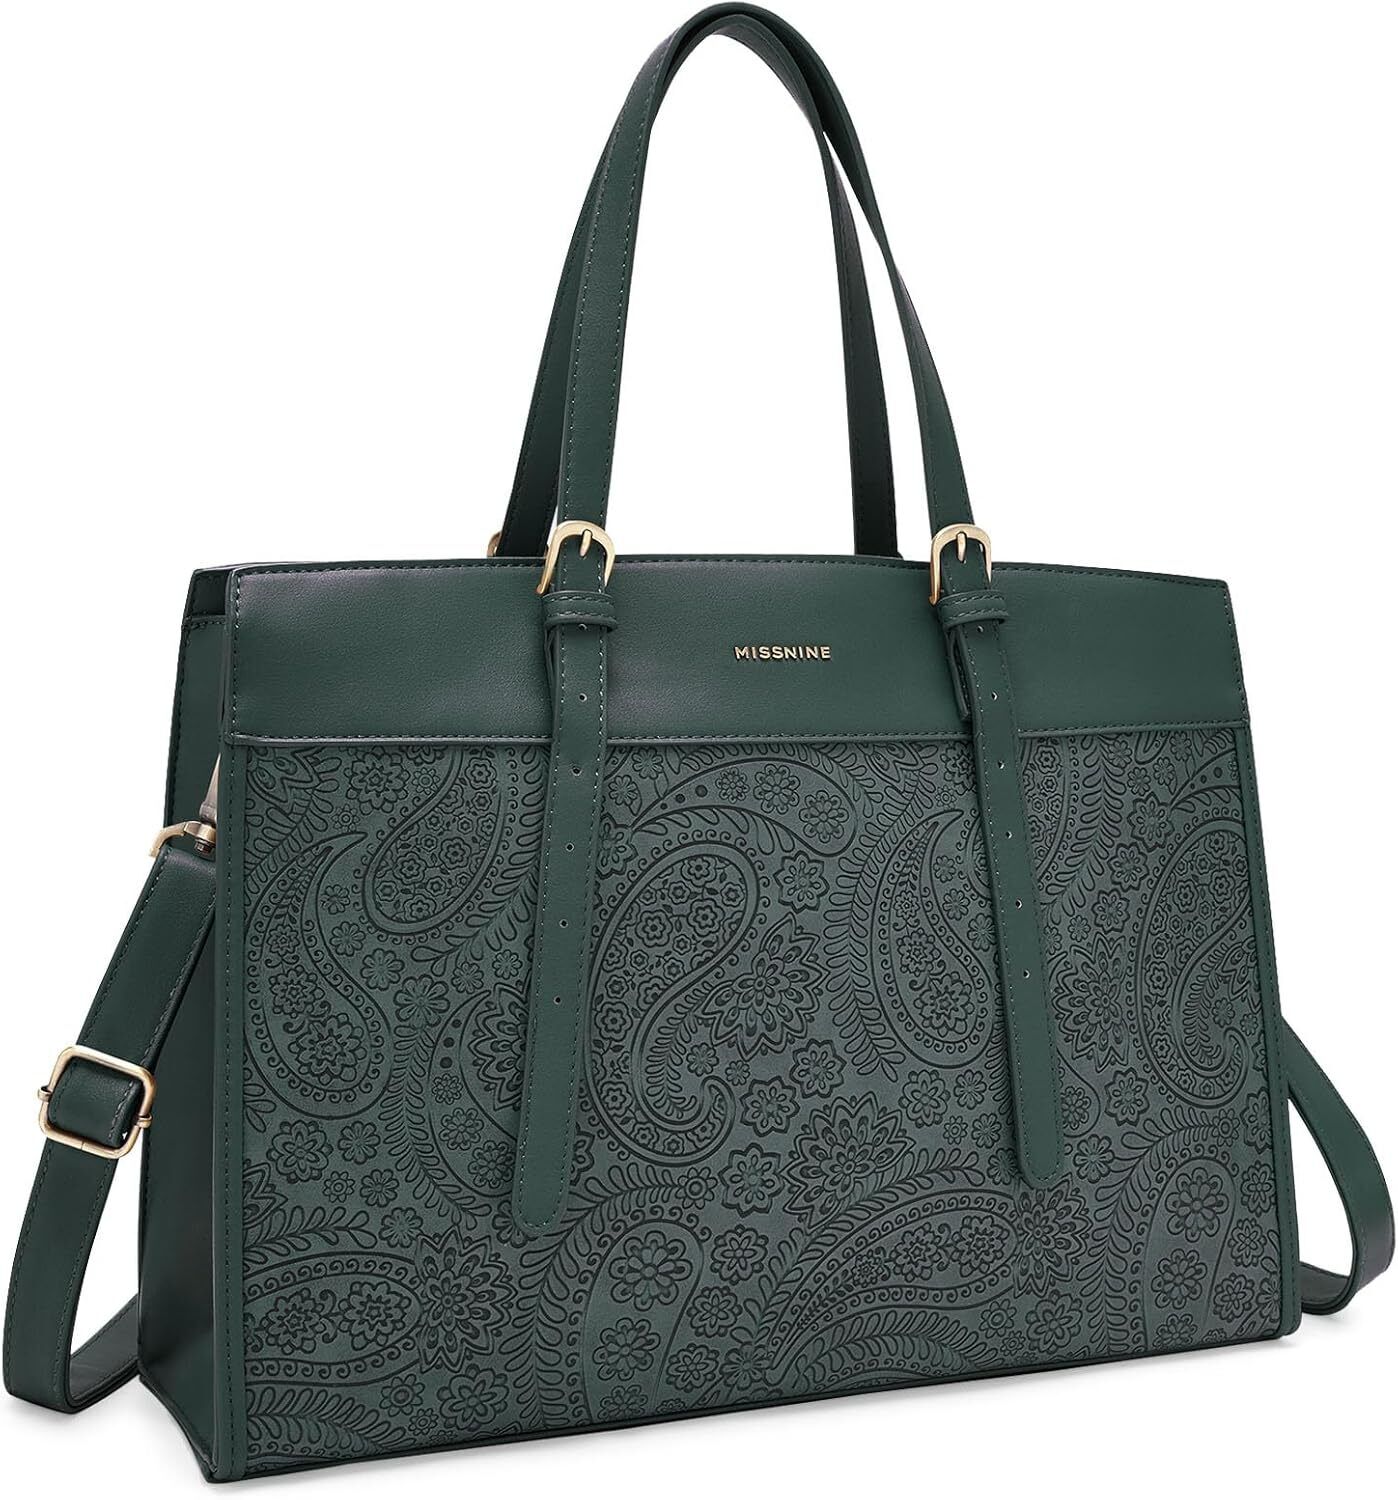 Missnine Laptop Bag for Women 15.6 inch Work Tote Bags PU Leather Green 